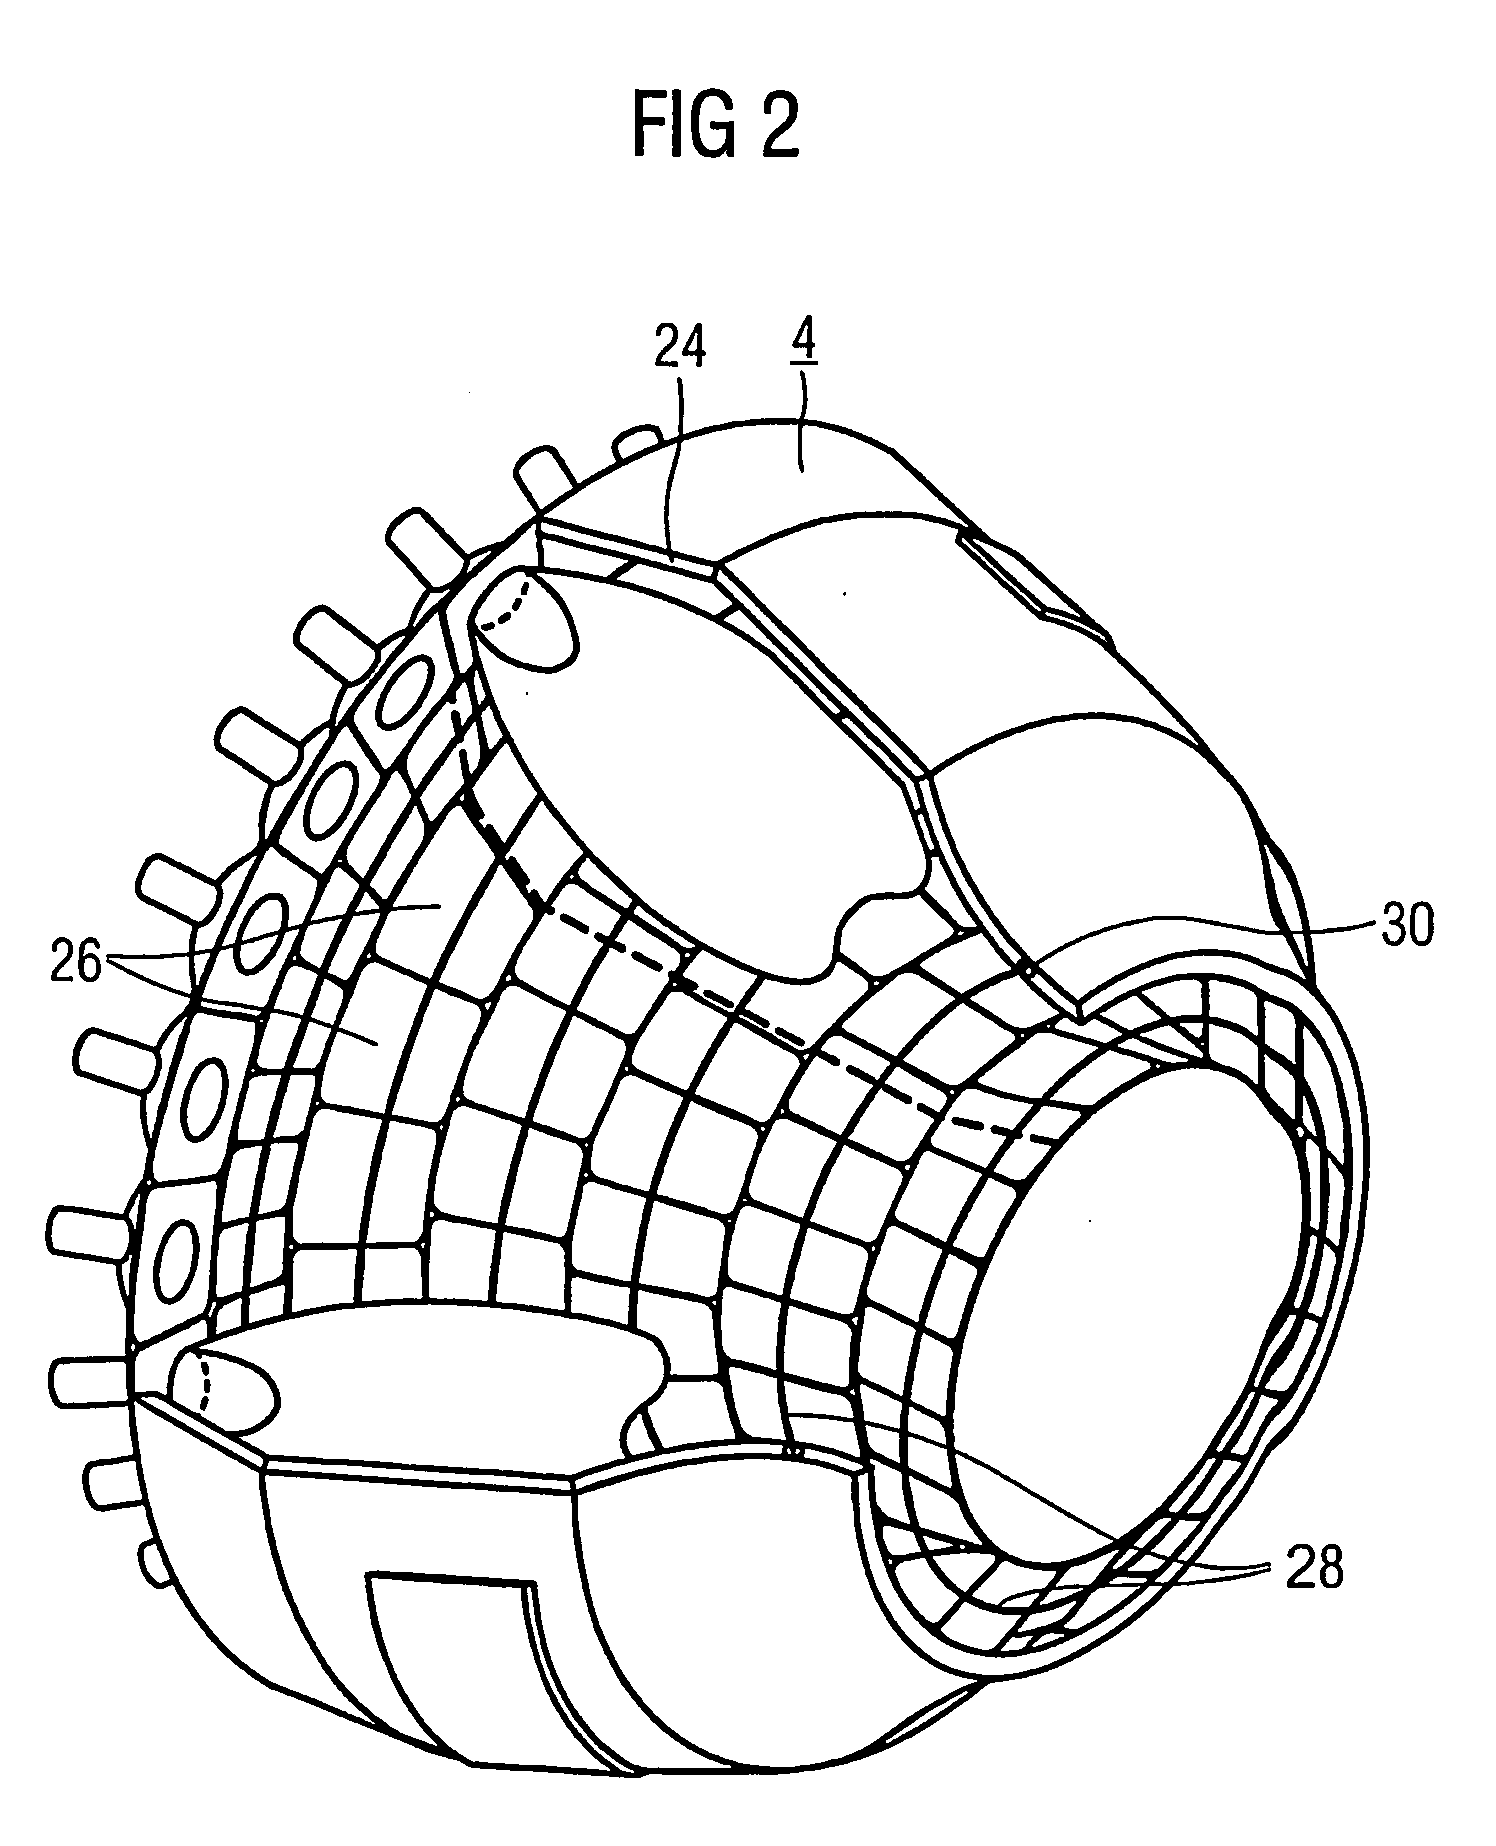 Thermal shield, especially for lining the wall of a combustion chamber